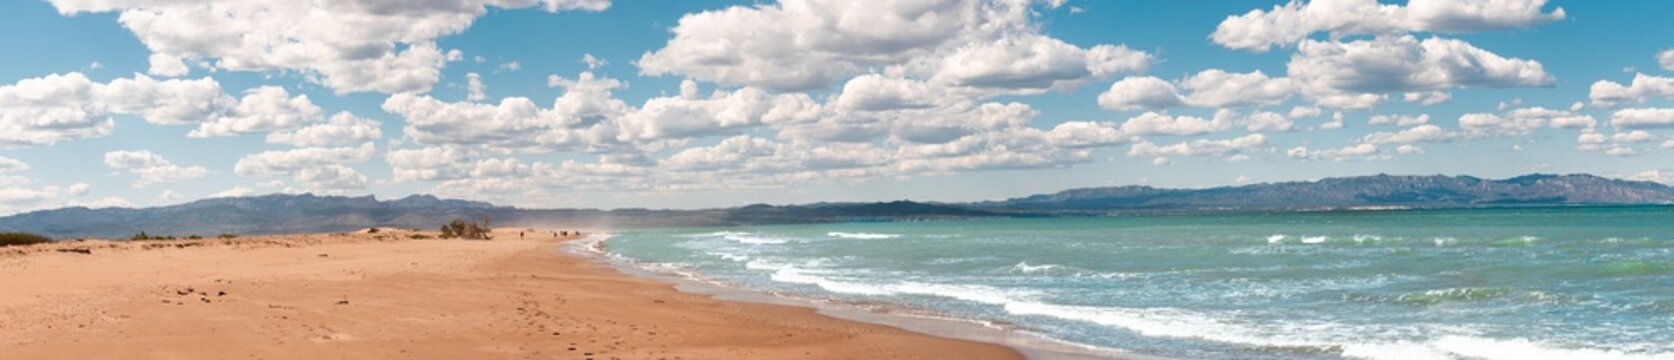 Famous Delta del Ebro beach called "fangar" beach situated in Tarragona, Spain. Picture captured in a sunny day with clouds in the sky. 